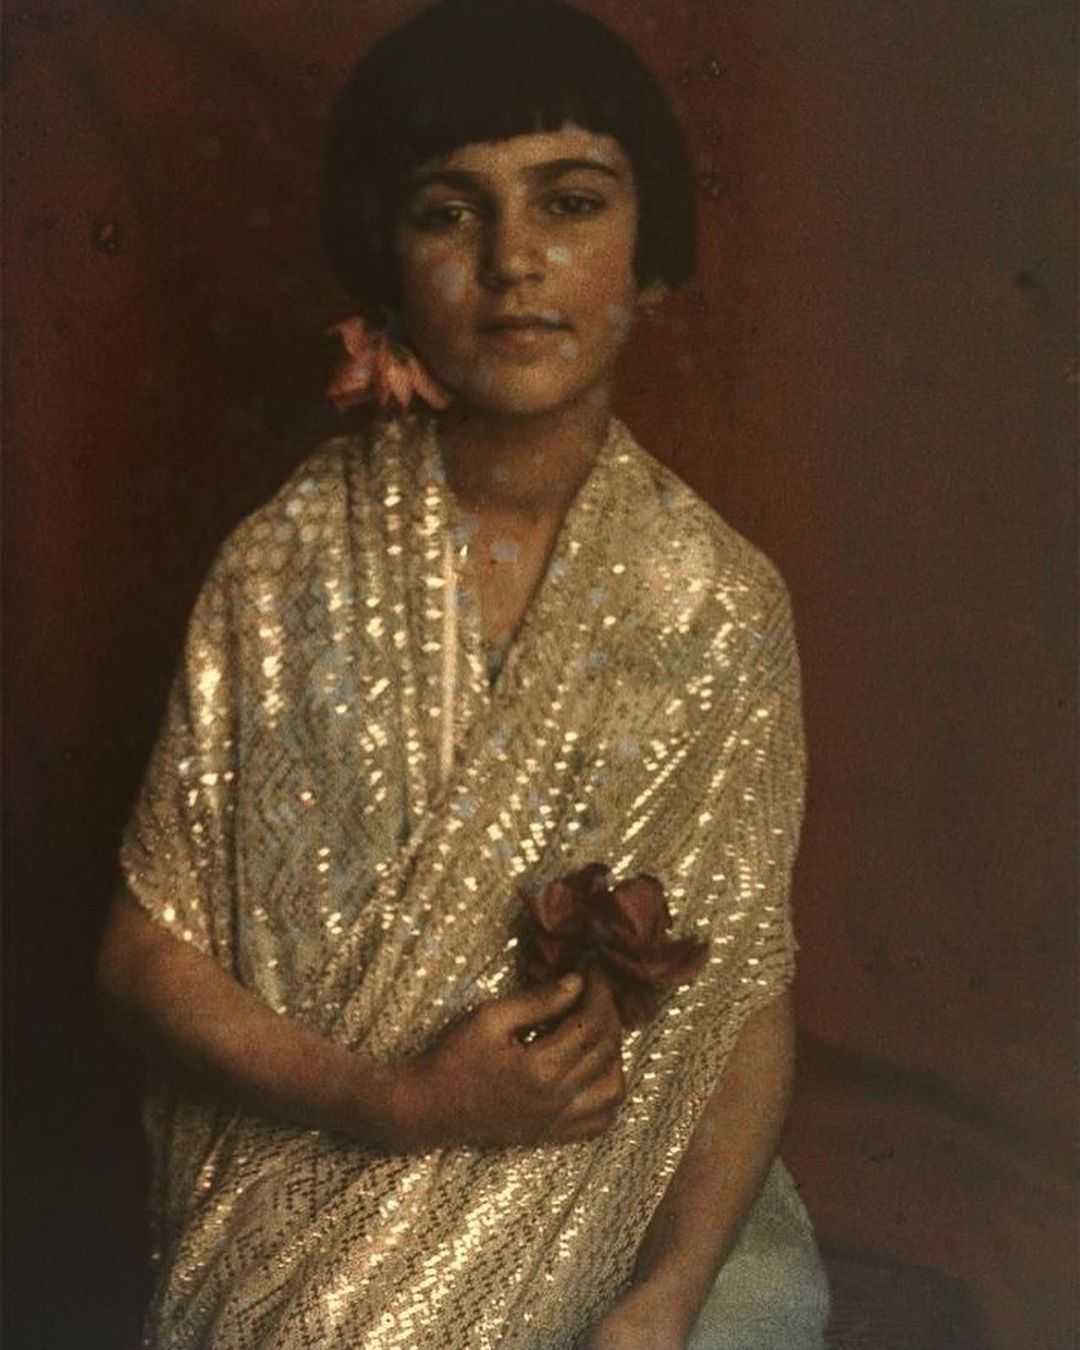 Amrita Sher Gil is also known as the pioneer of modern Indian art,